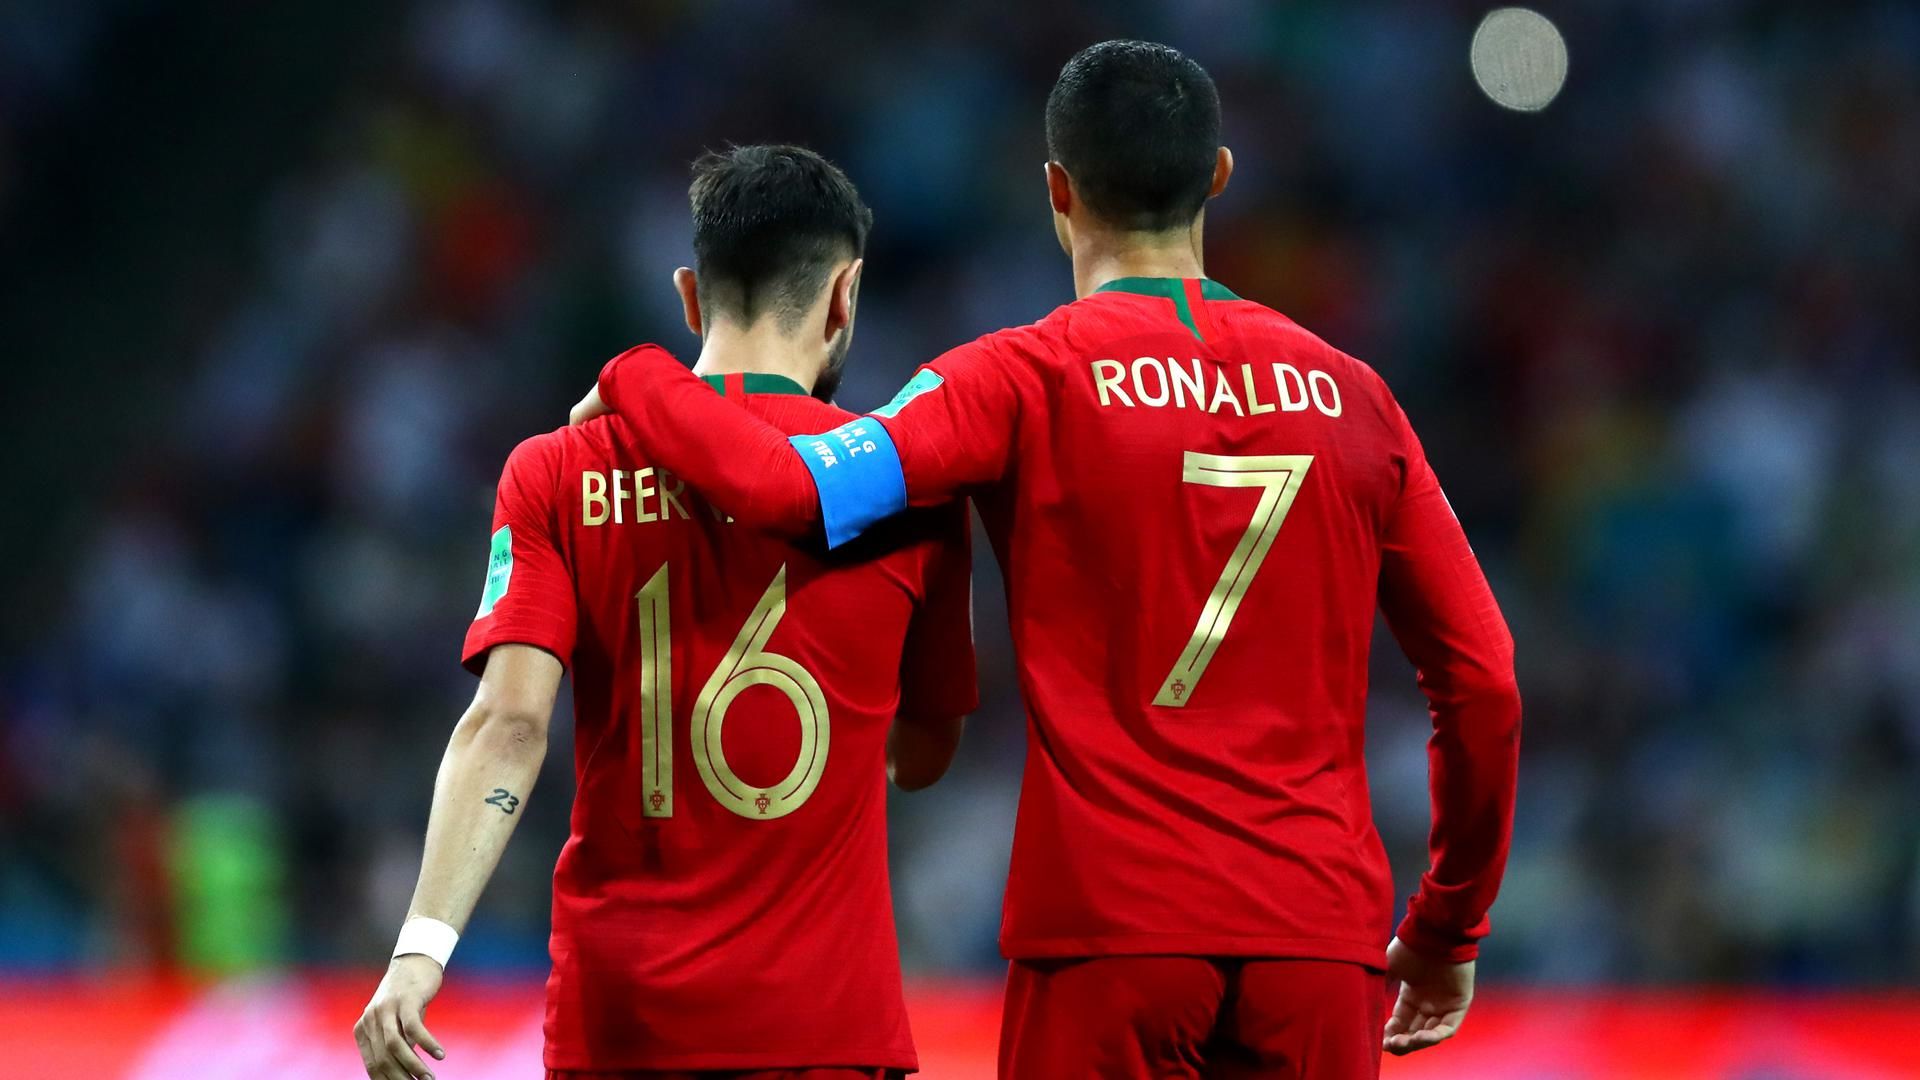 Portugal's midfielder Fernandes: When Cristiano is on the field and we lose, everyone talks about it